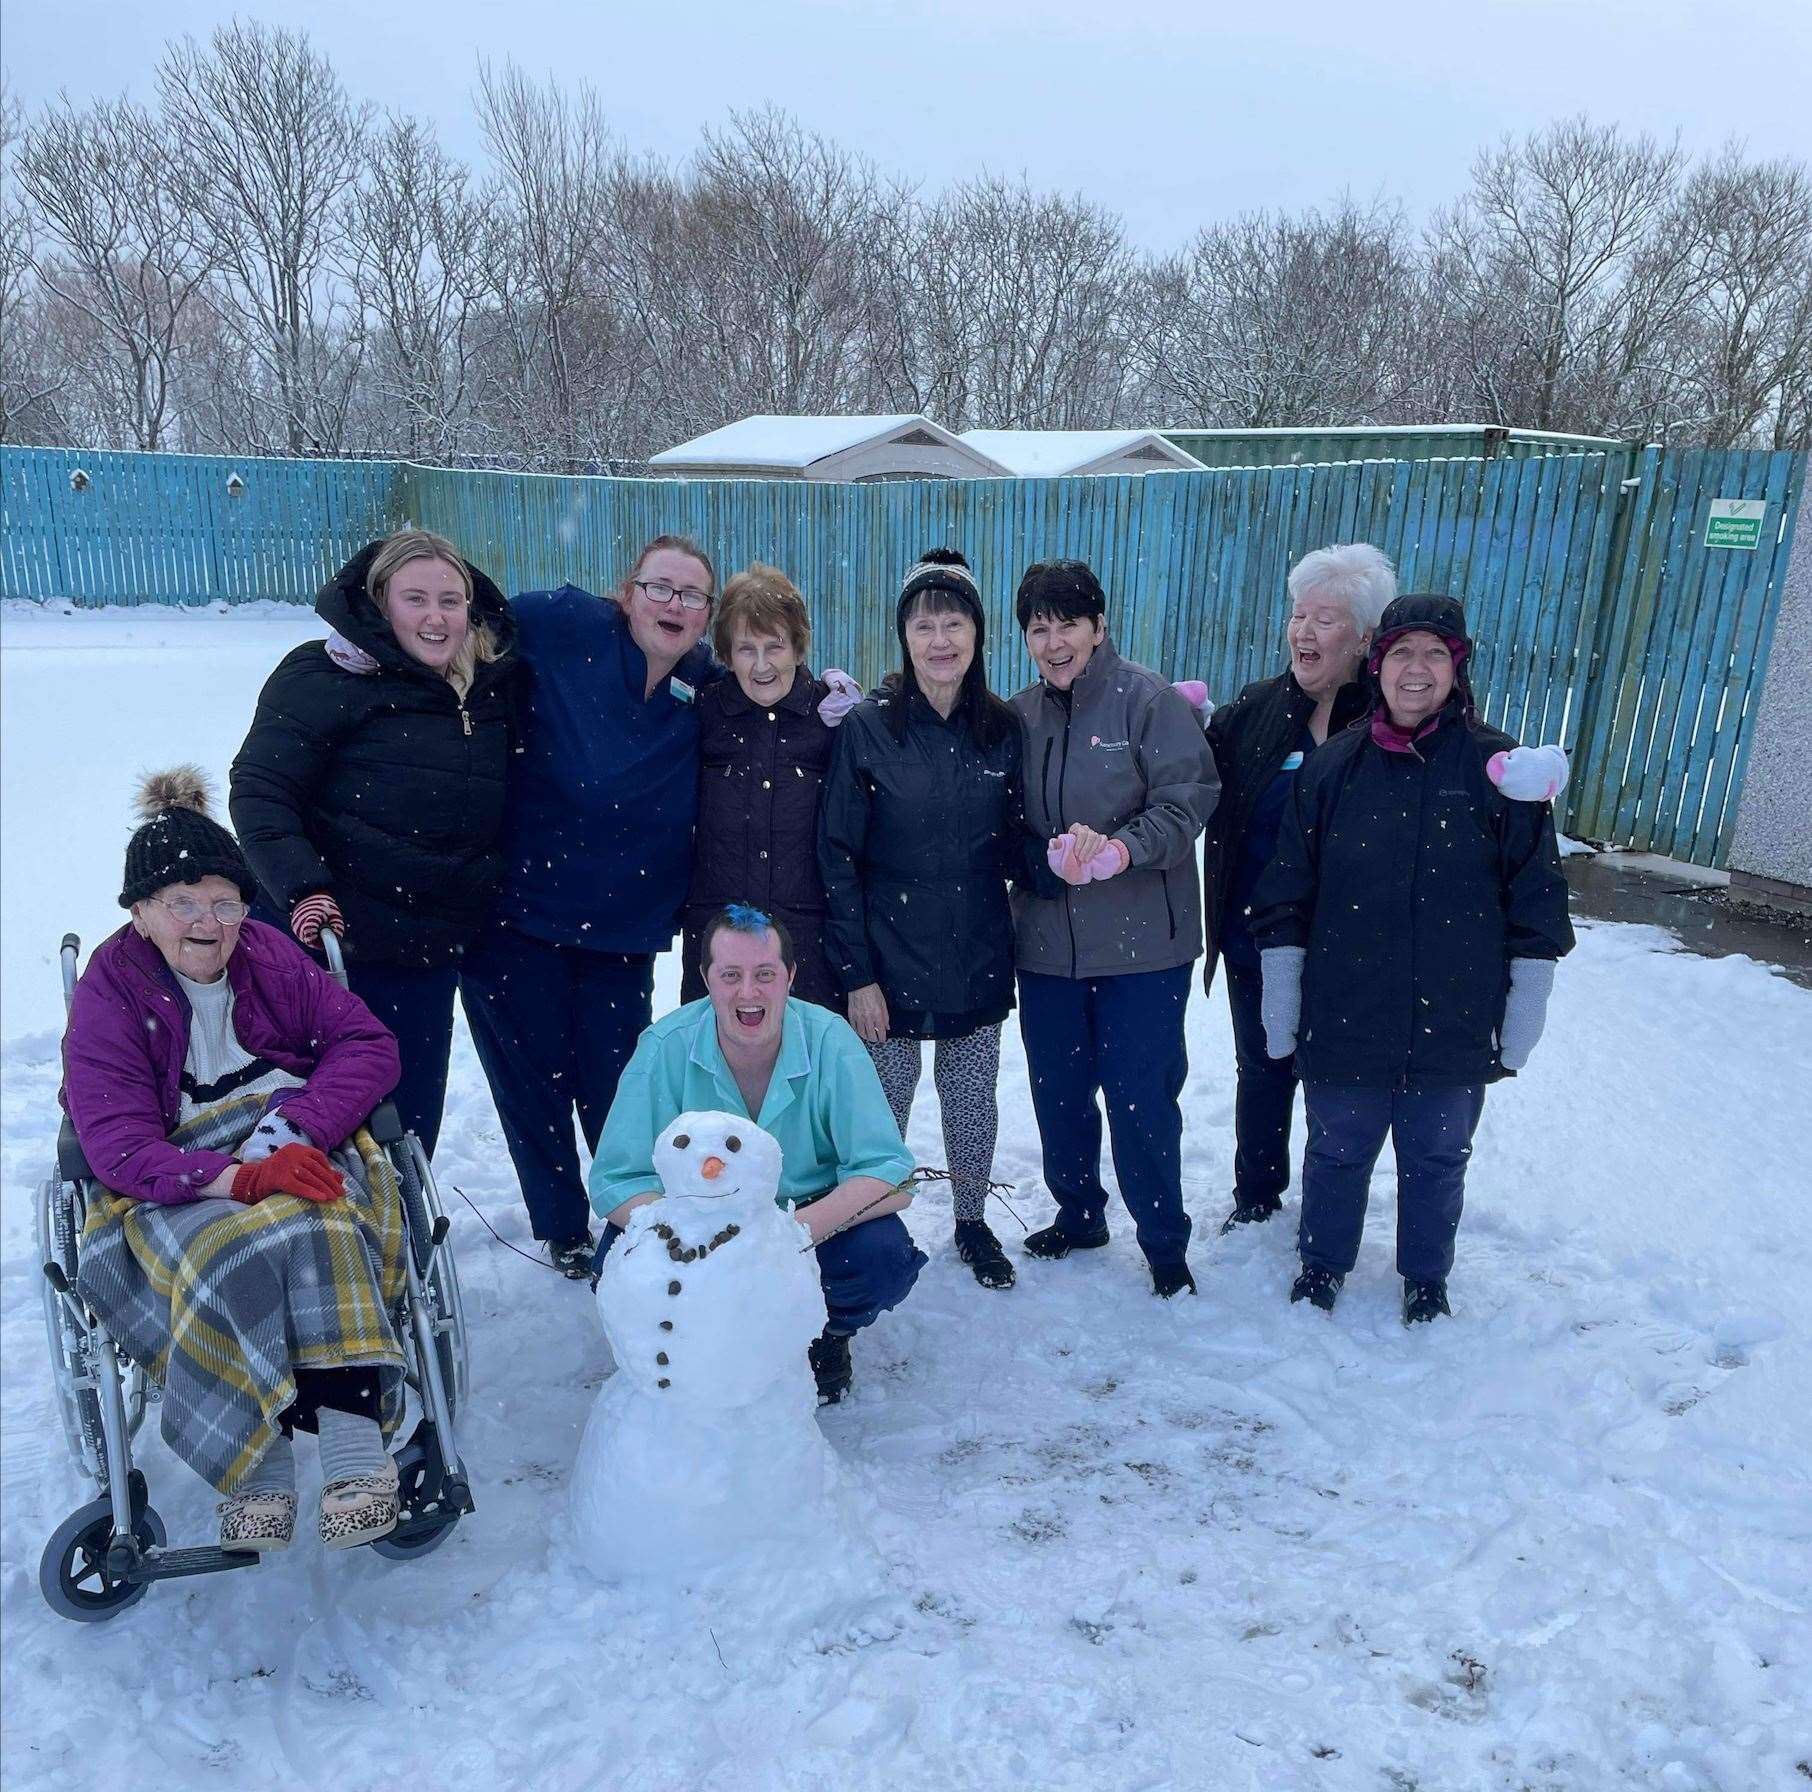 Staff and residents make the most of the snowy weather at Meadows Care Home in Dornoch.